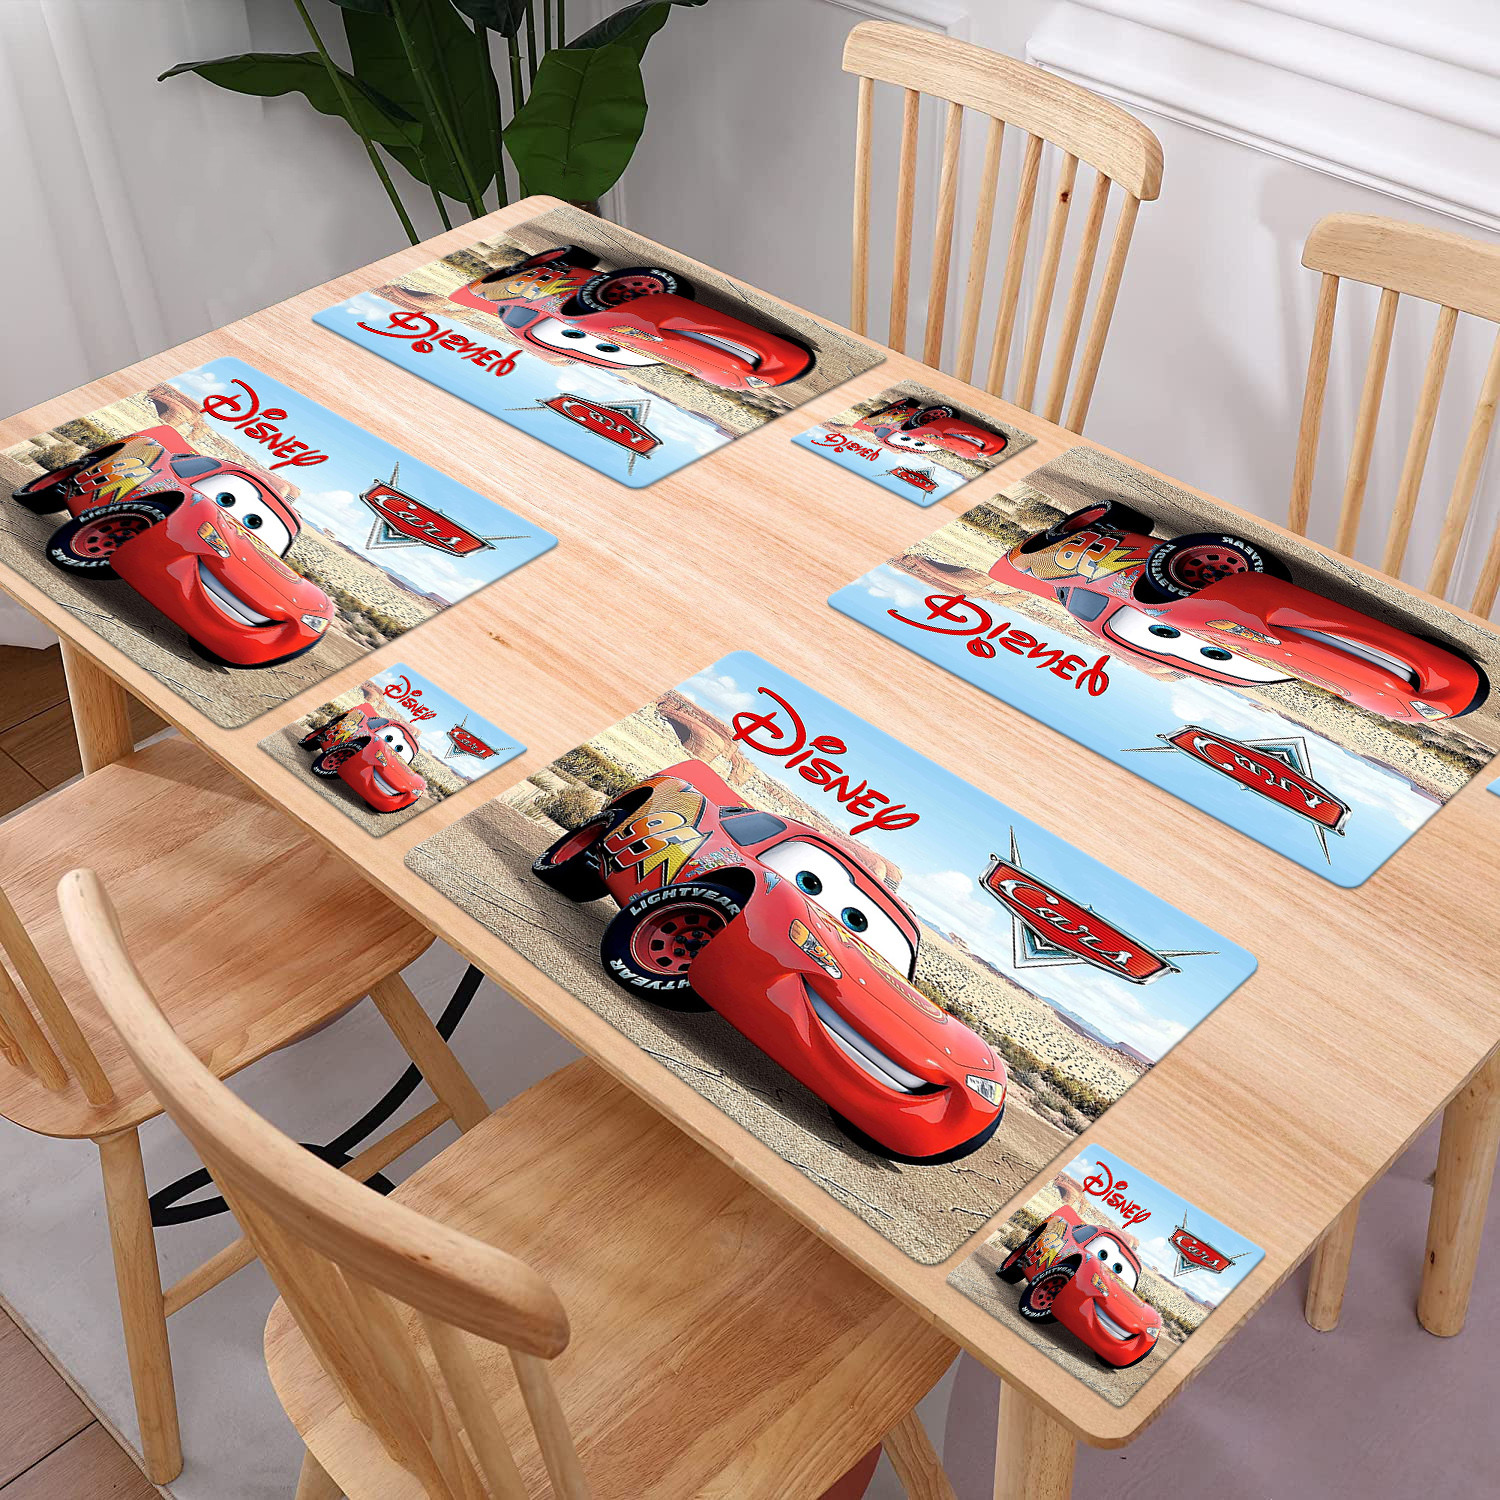 Kuber Industries Multiuses Car Print PVC Table Placemat With 6 Coasters for kitchen, Dining Table Set of 6 (Beige)